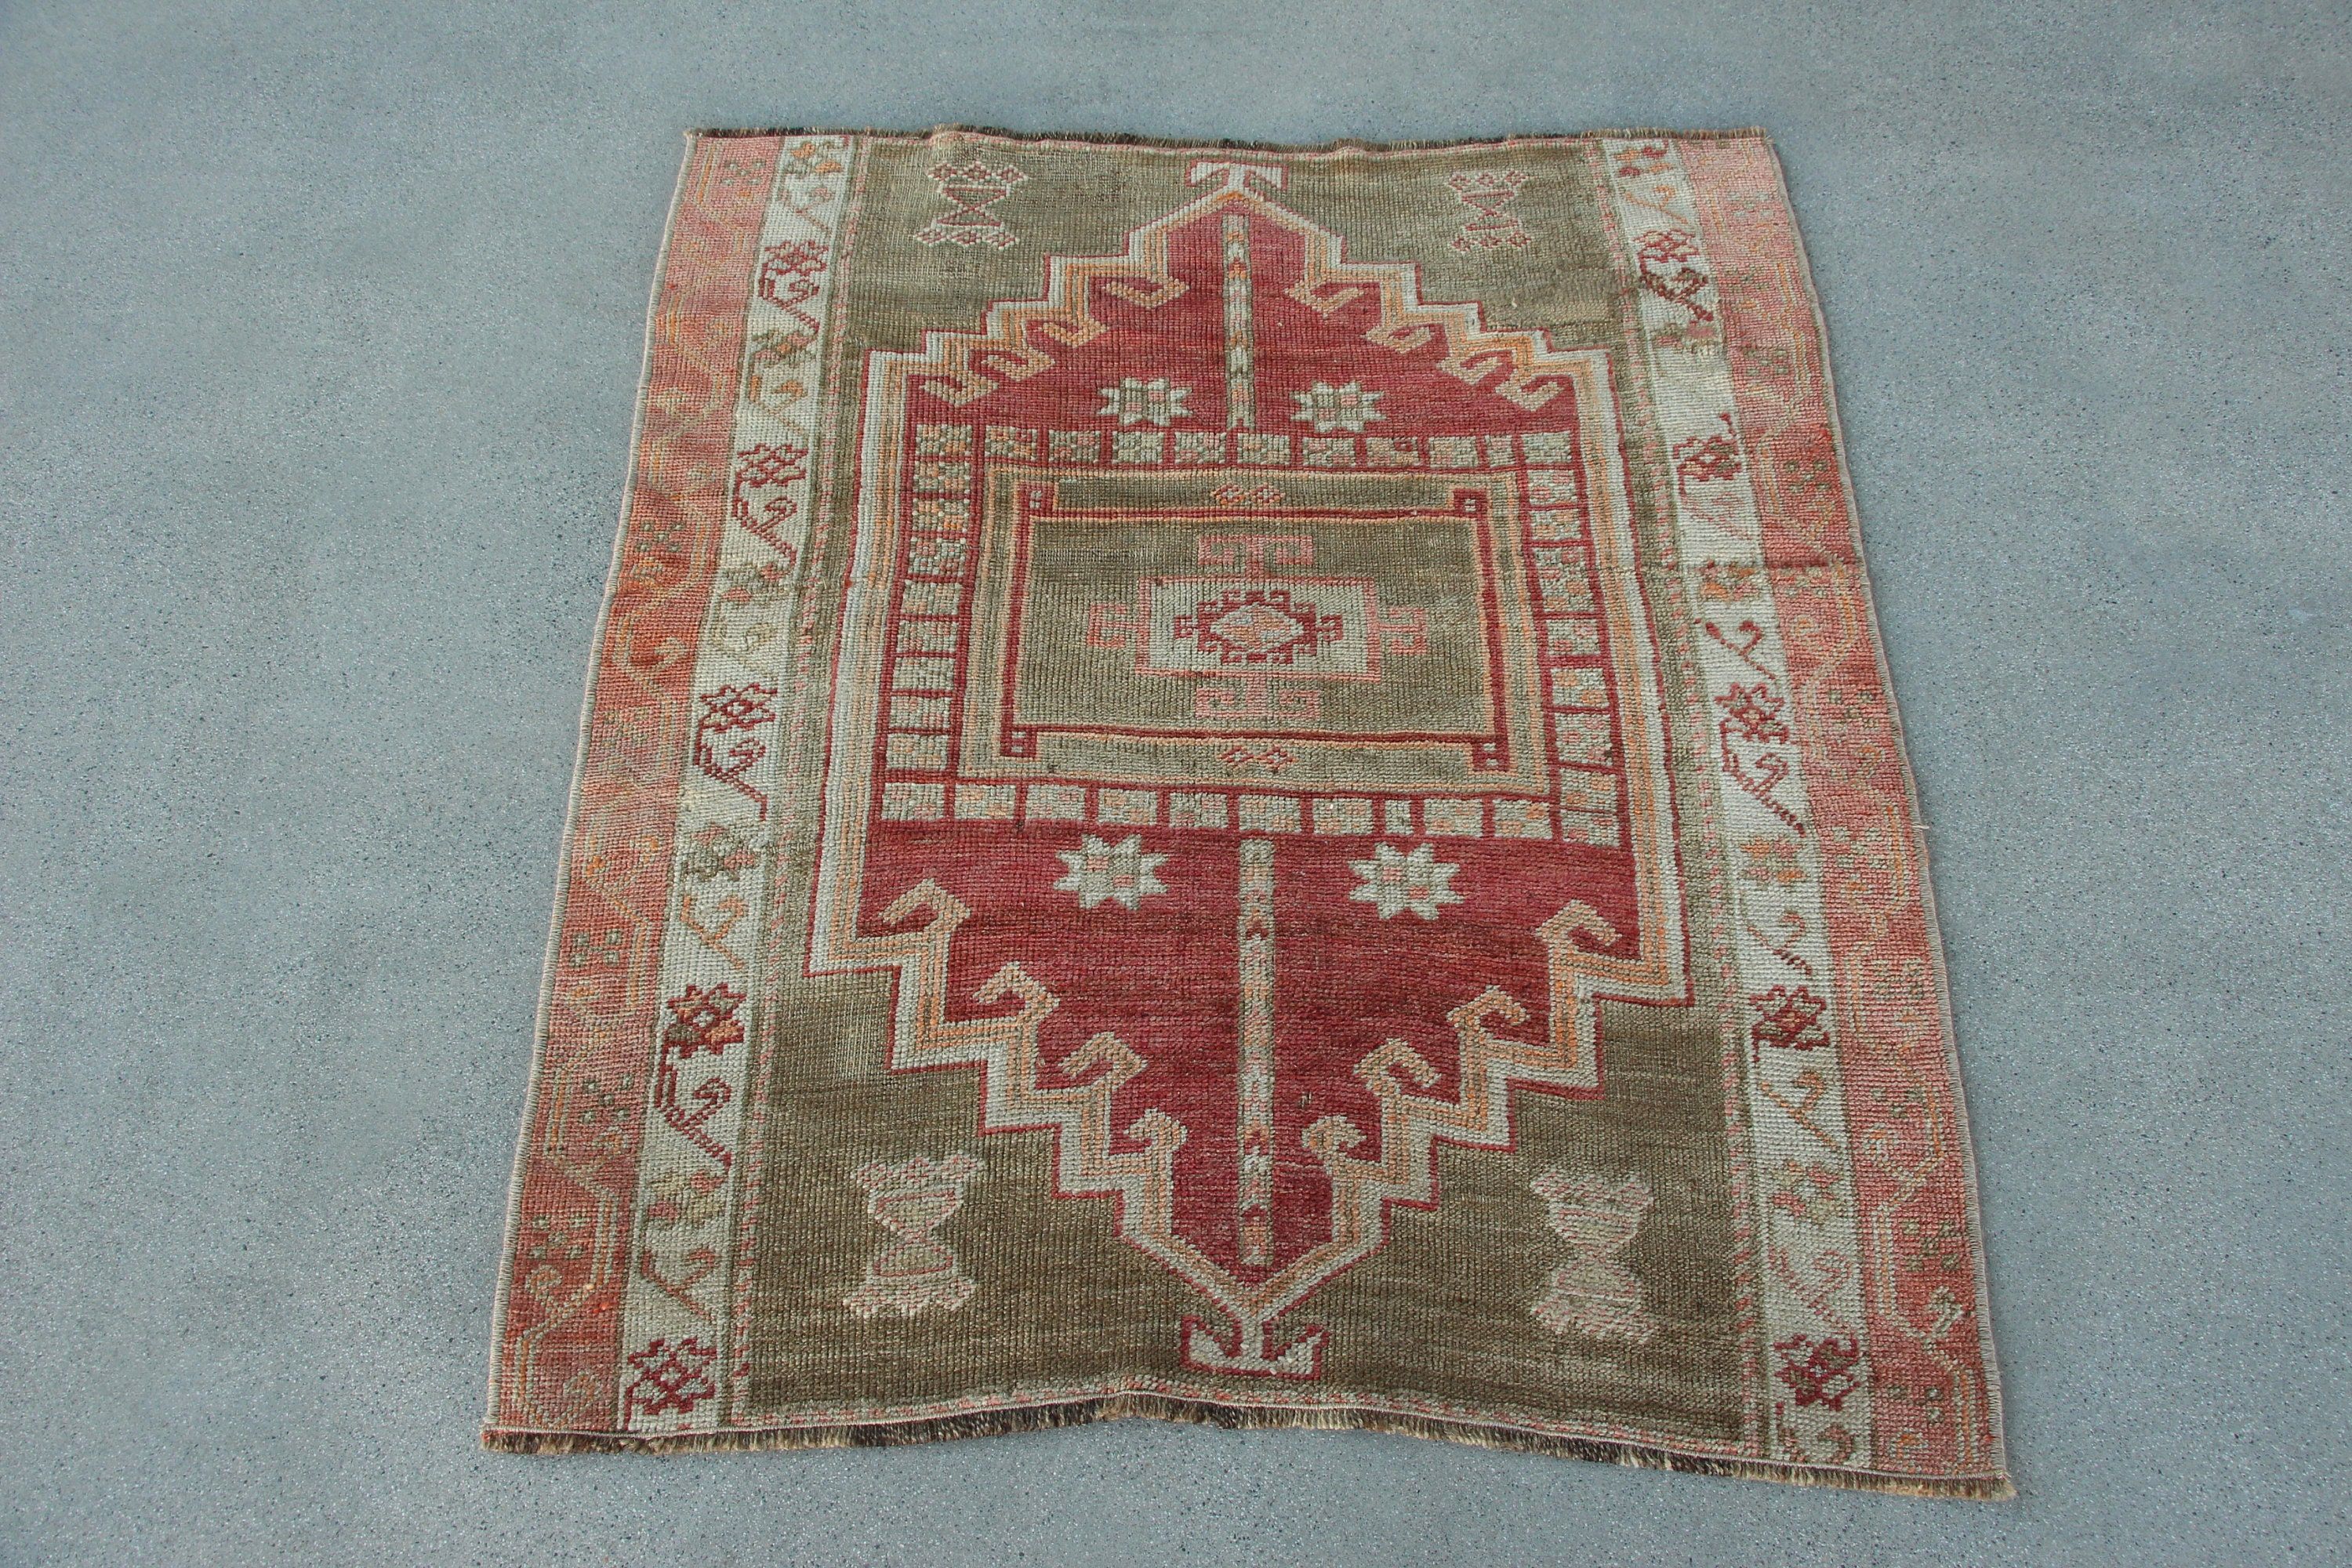 Rugs for Entry, Bedroom Rugs, Kitchen Rugs, Red Floor Rug, Vintage Rugs, Turkish Rug, 3.1x3.6 ft Small Rugs, Car Mat Rug